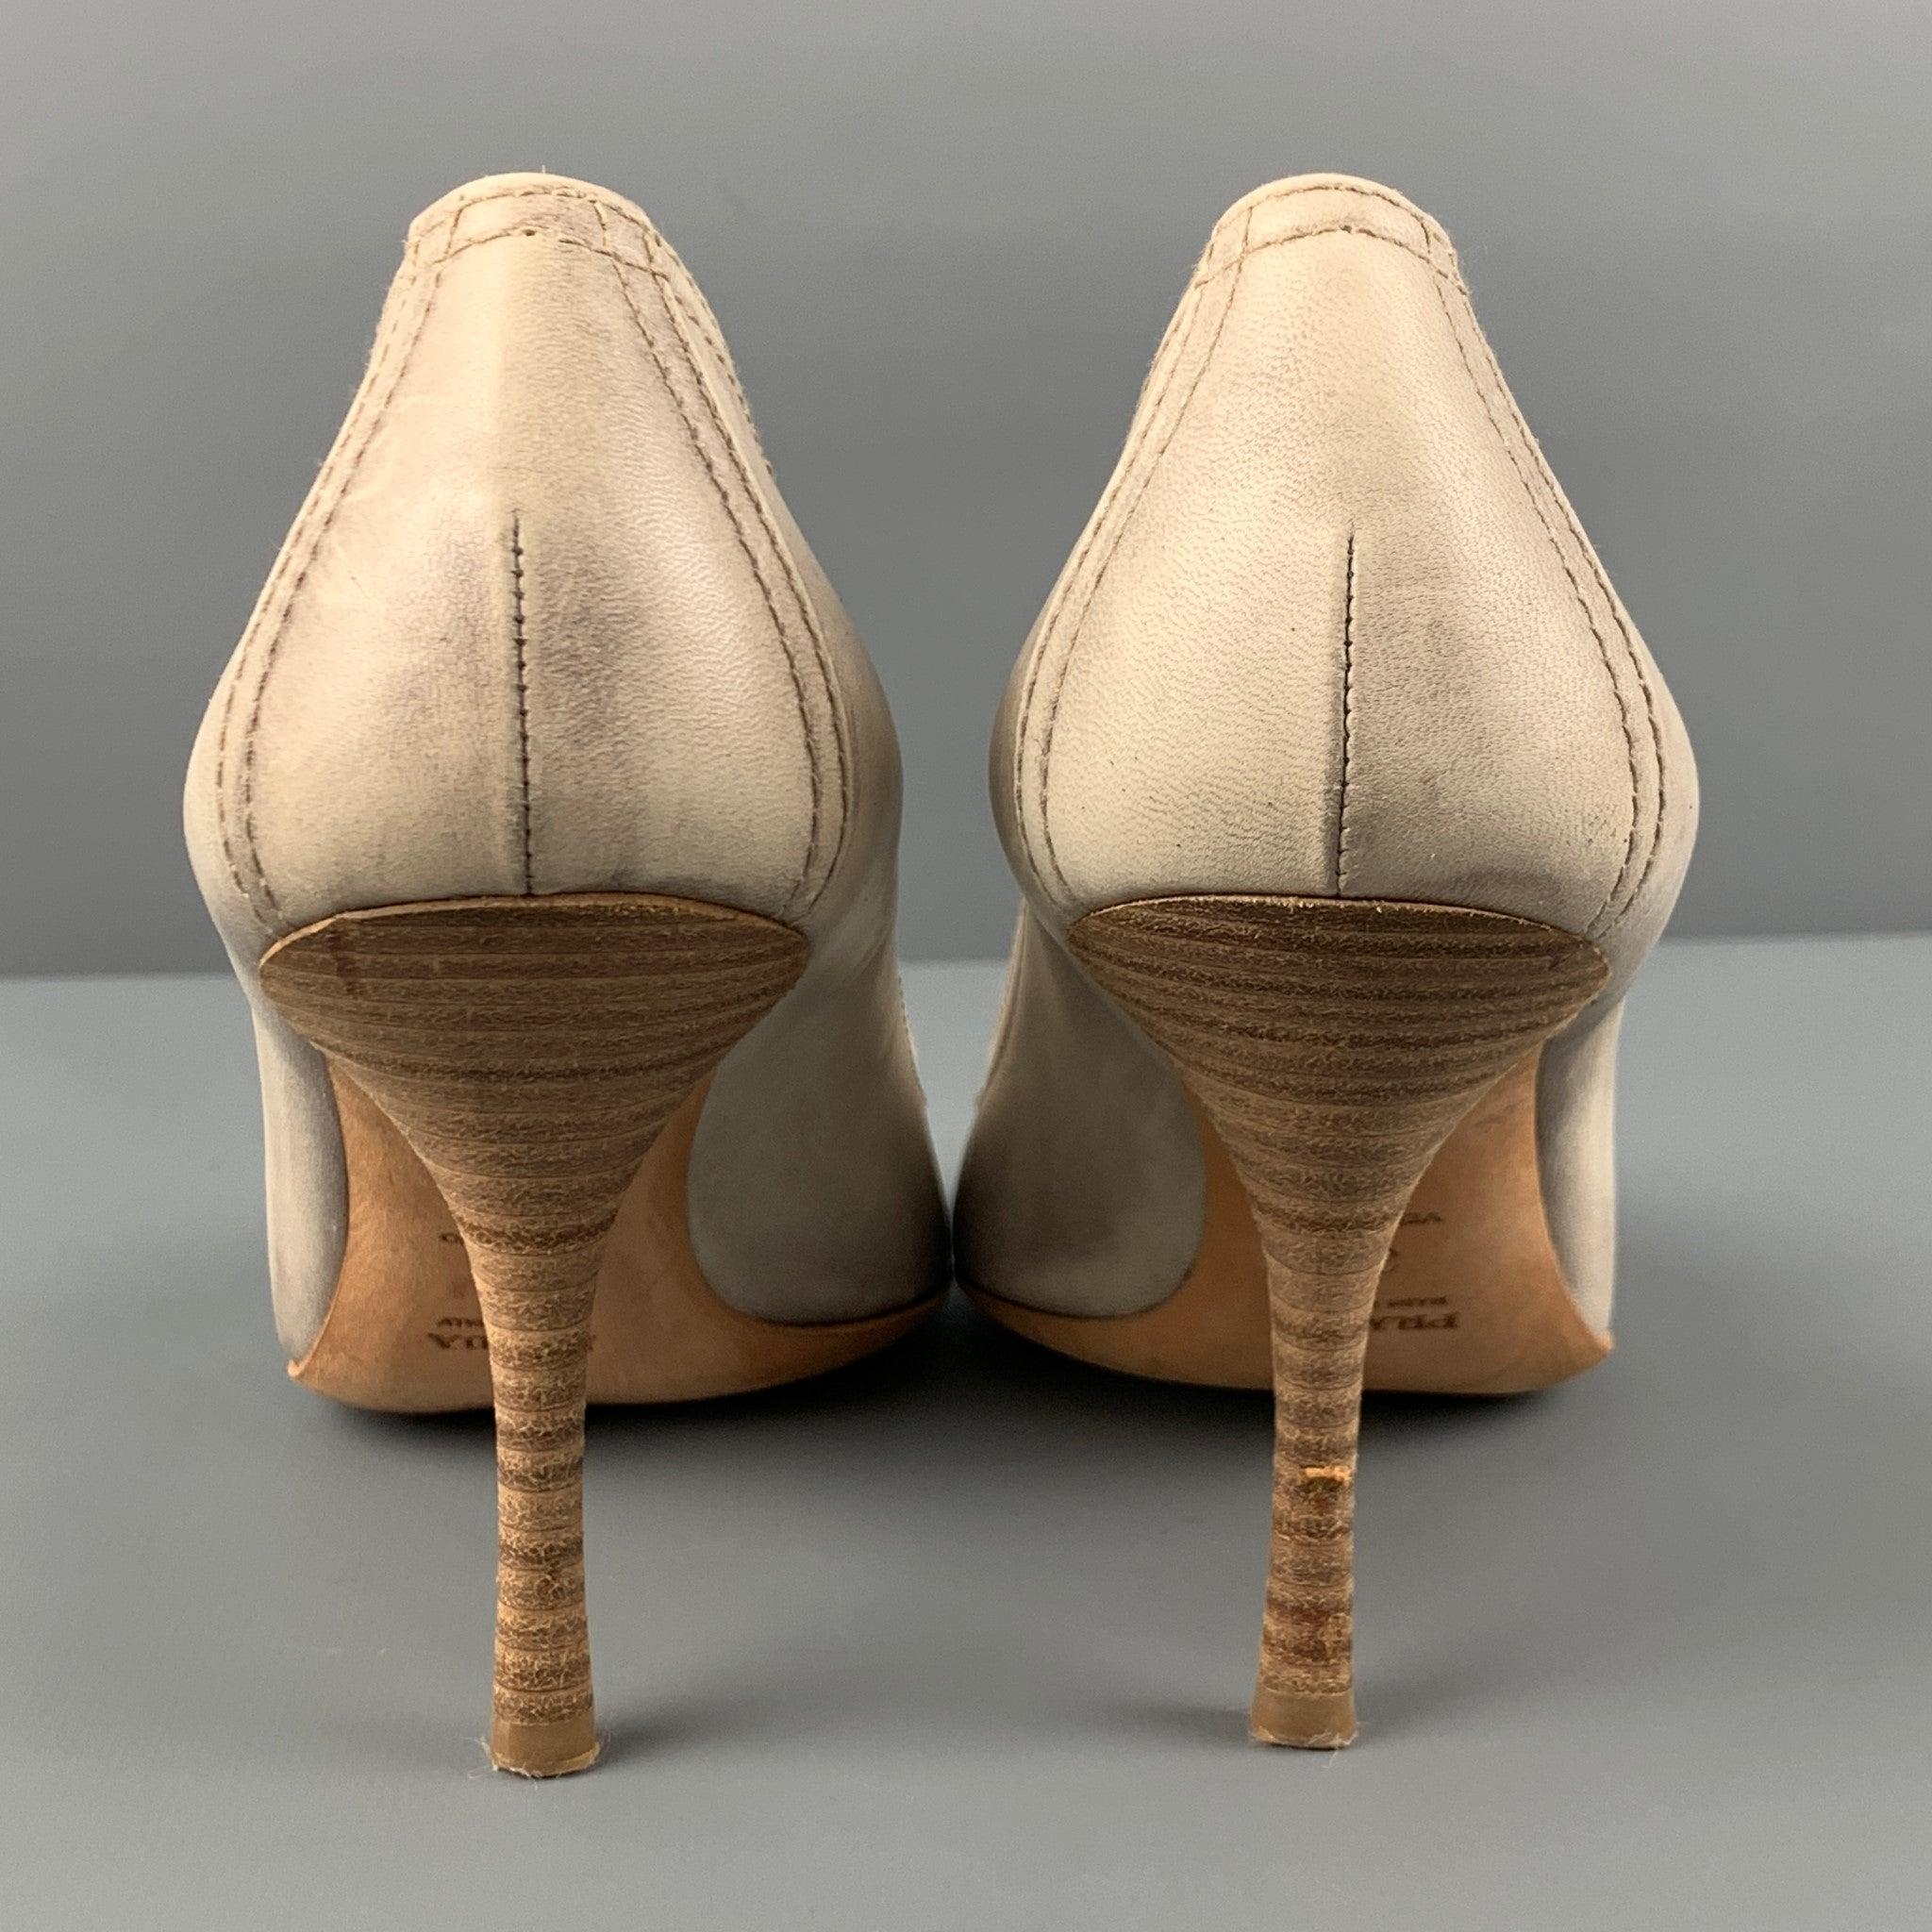 PRADA Size 7 Beige Leather Marbled Peep Toe Pumps For Sale 1